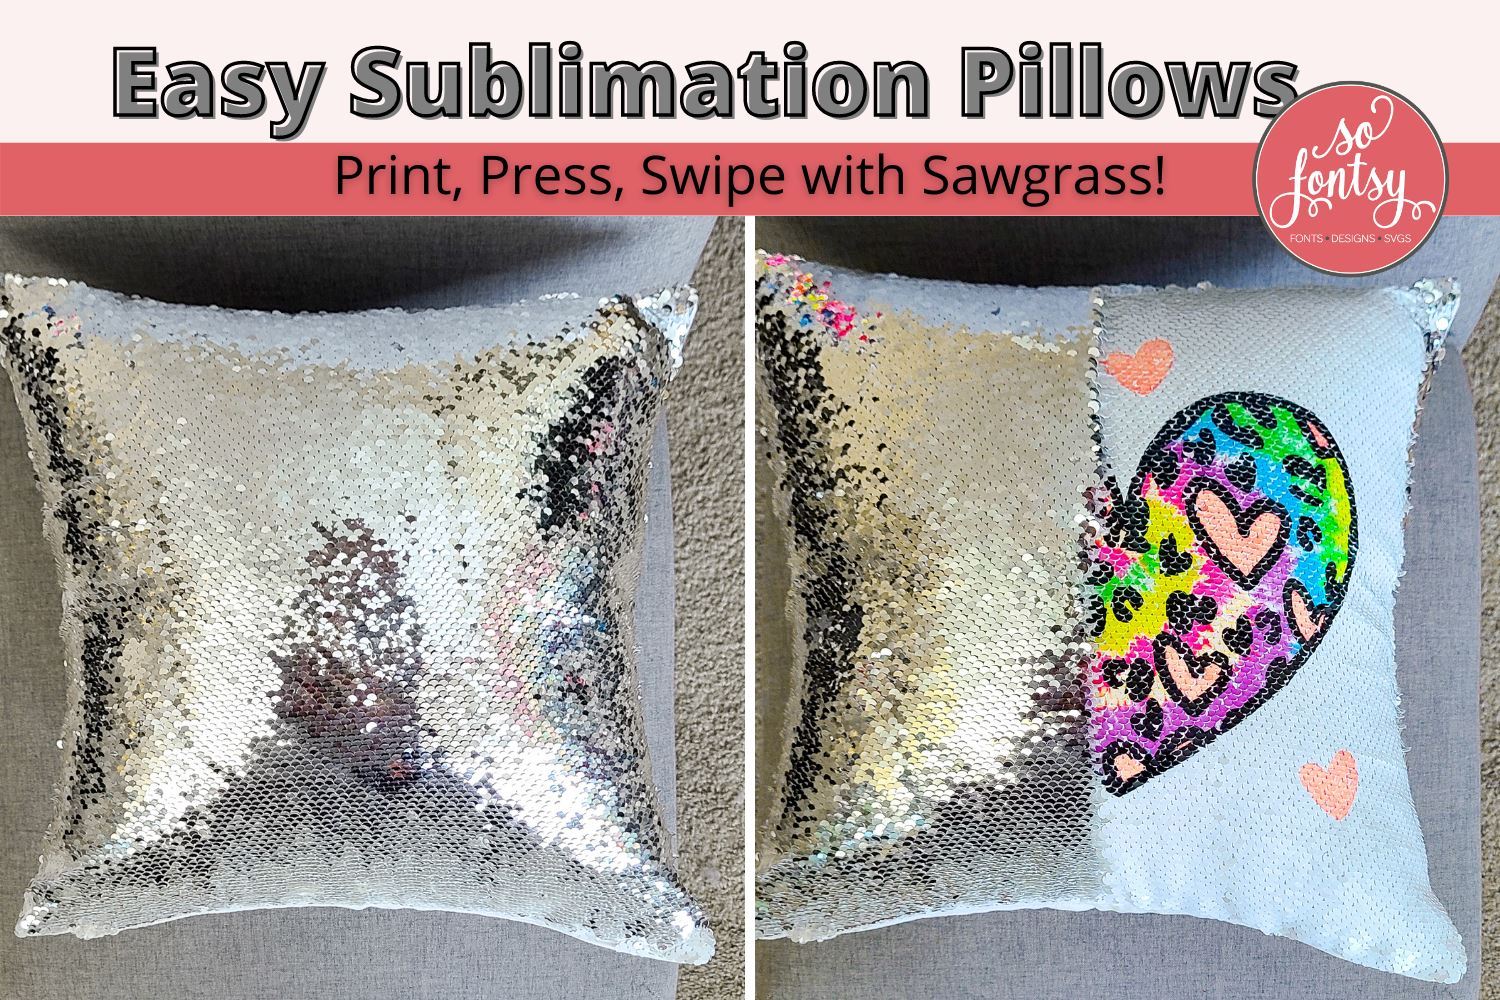 How to Use a Pressing Pillow - So Fontsy